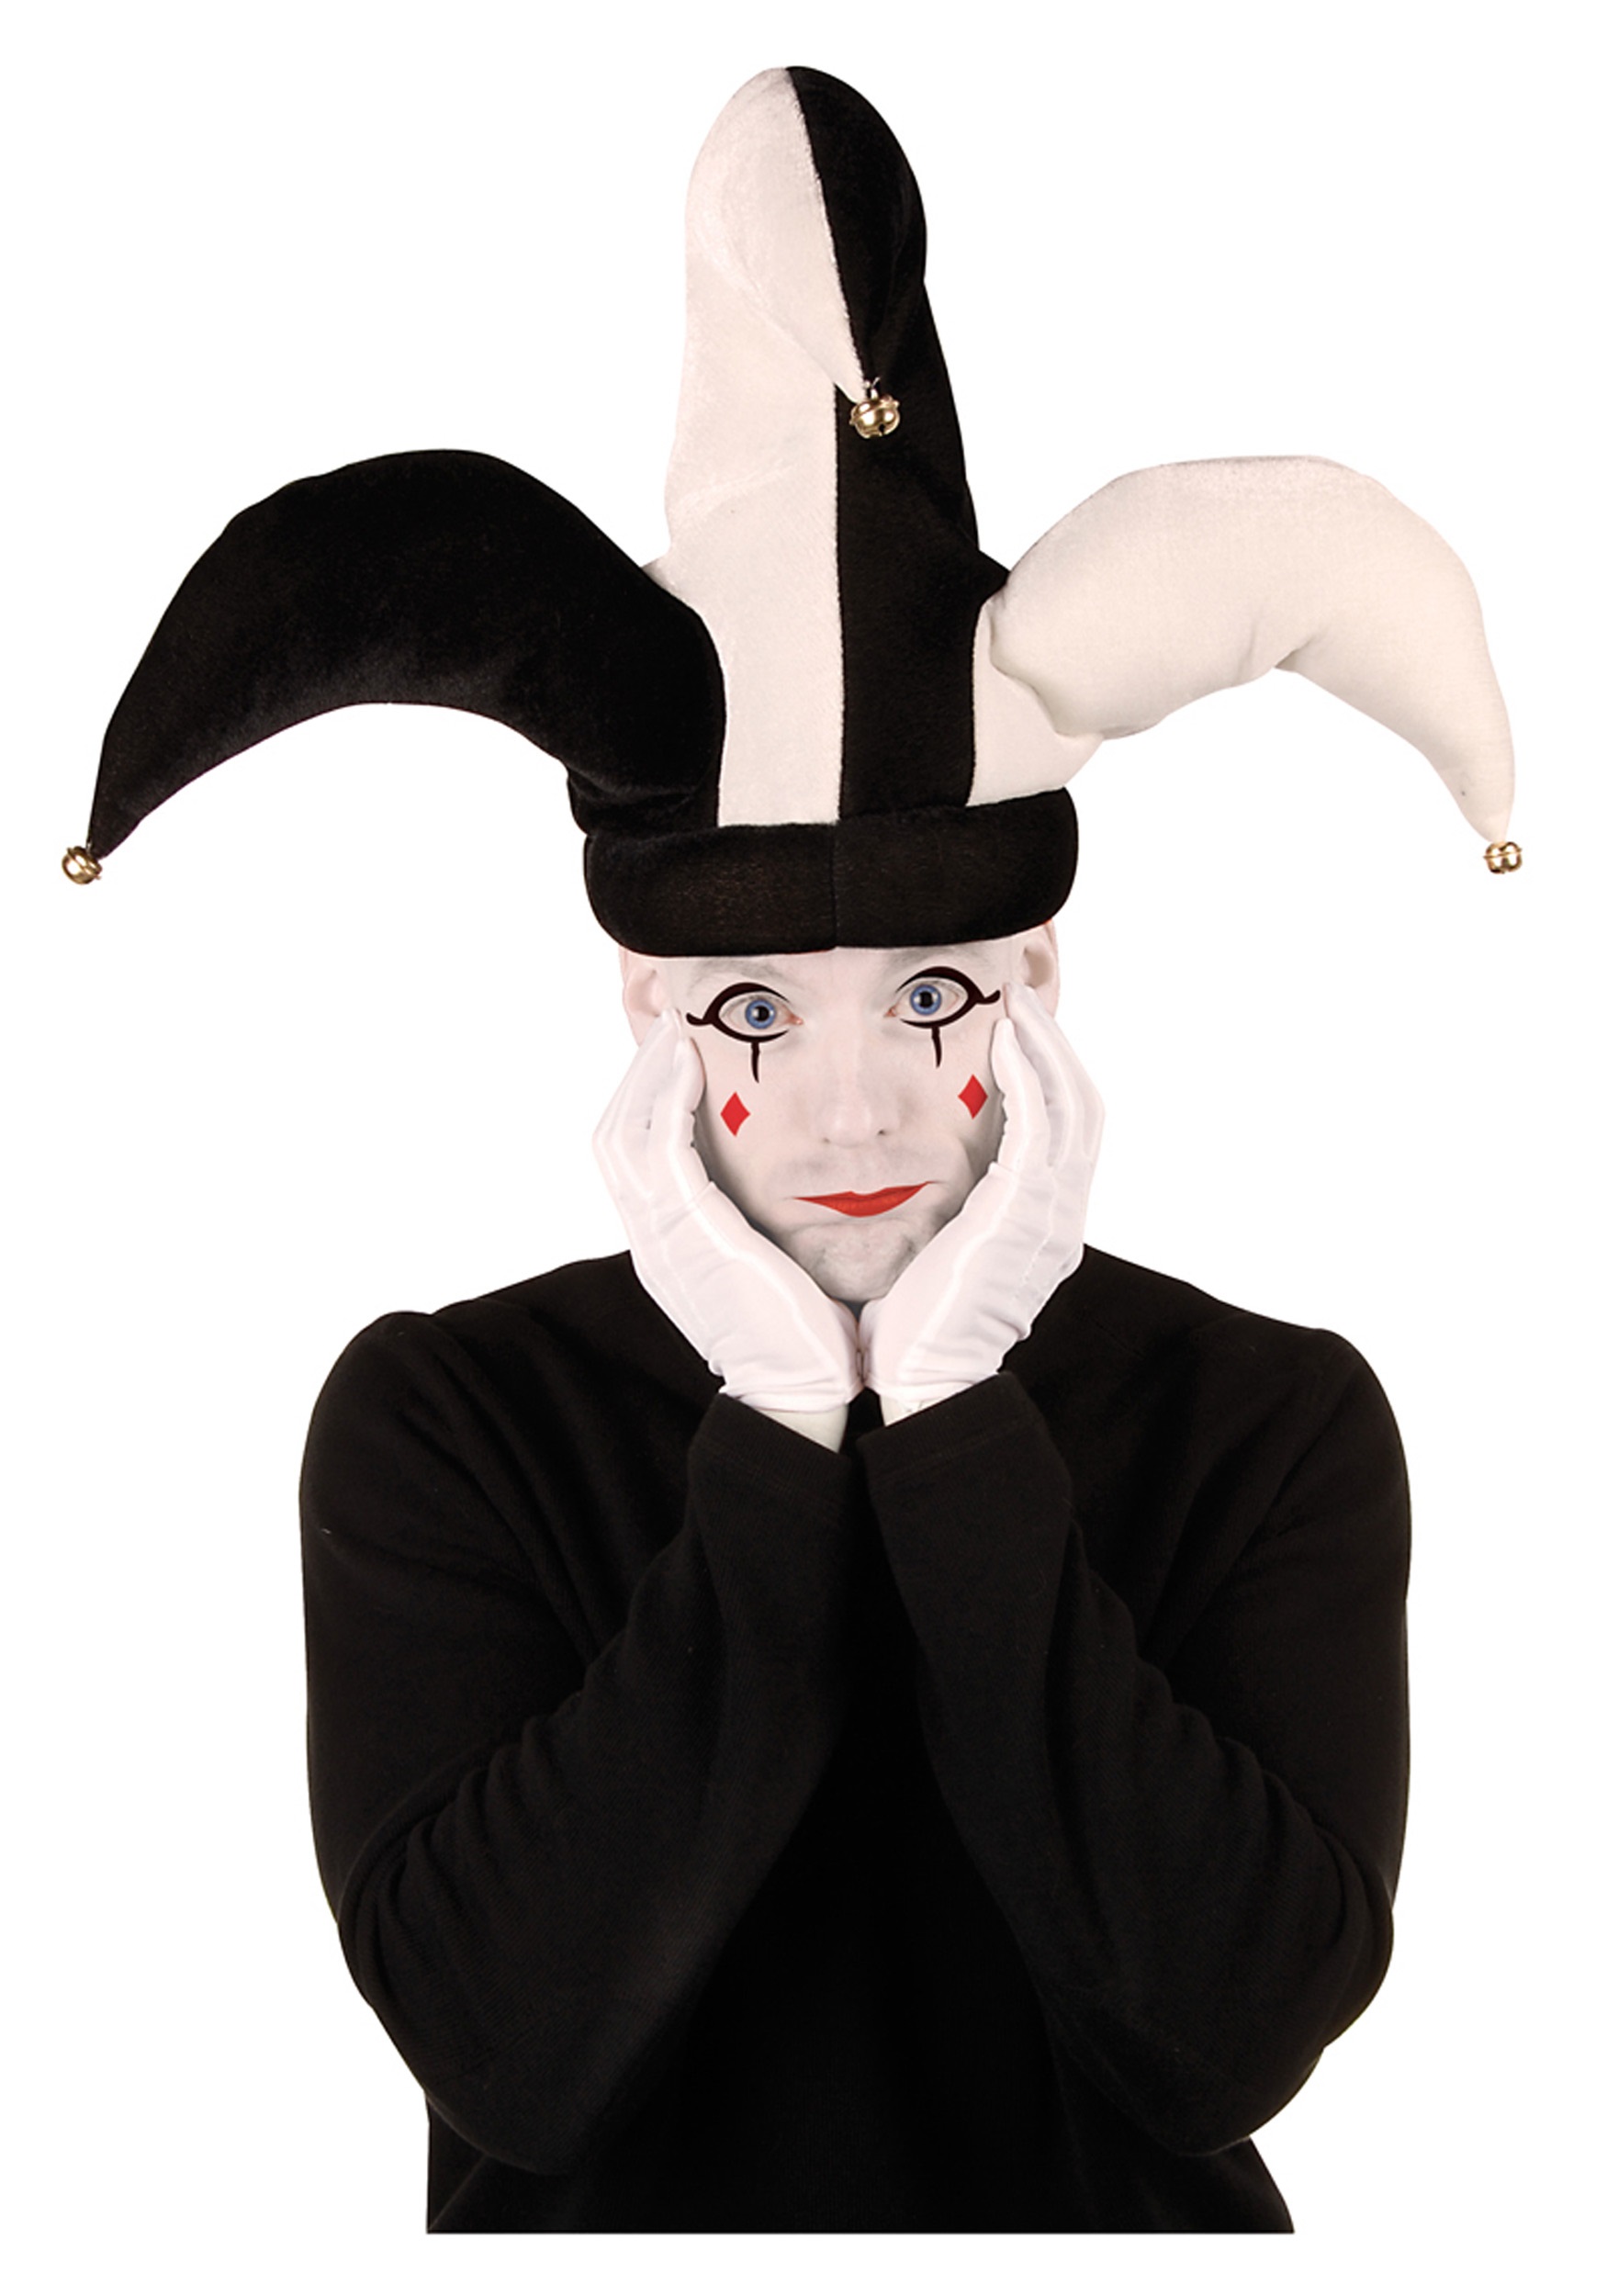 http://images.halloweencostumes.com/products/14776/1-1/jester-hat.jpg